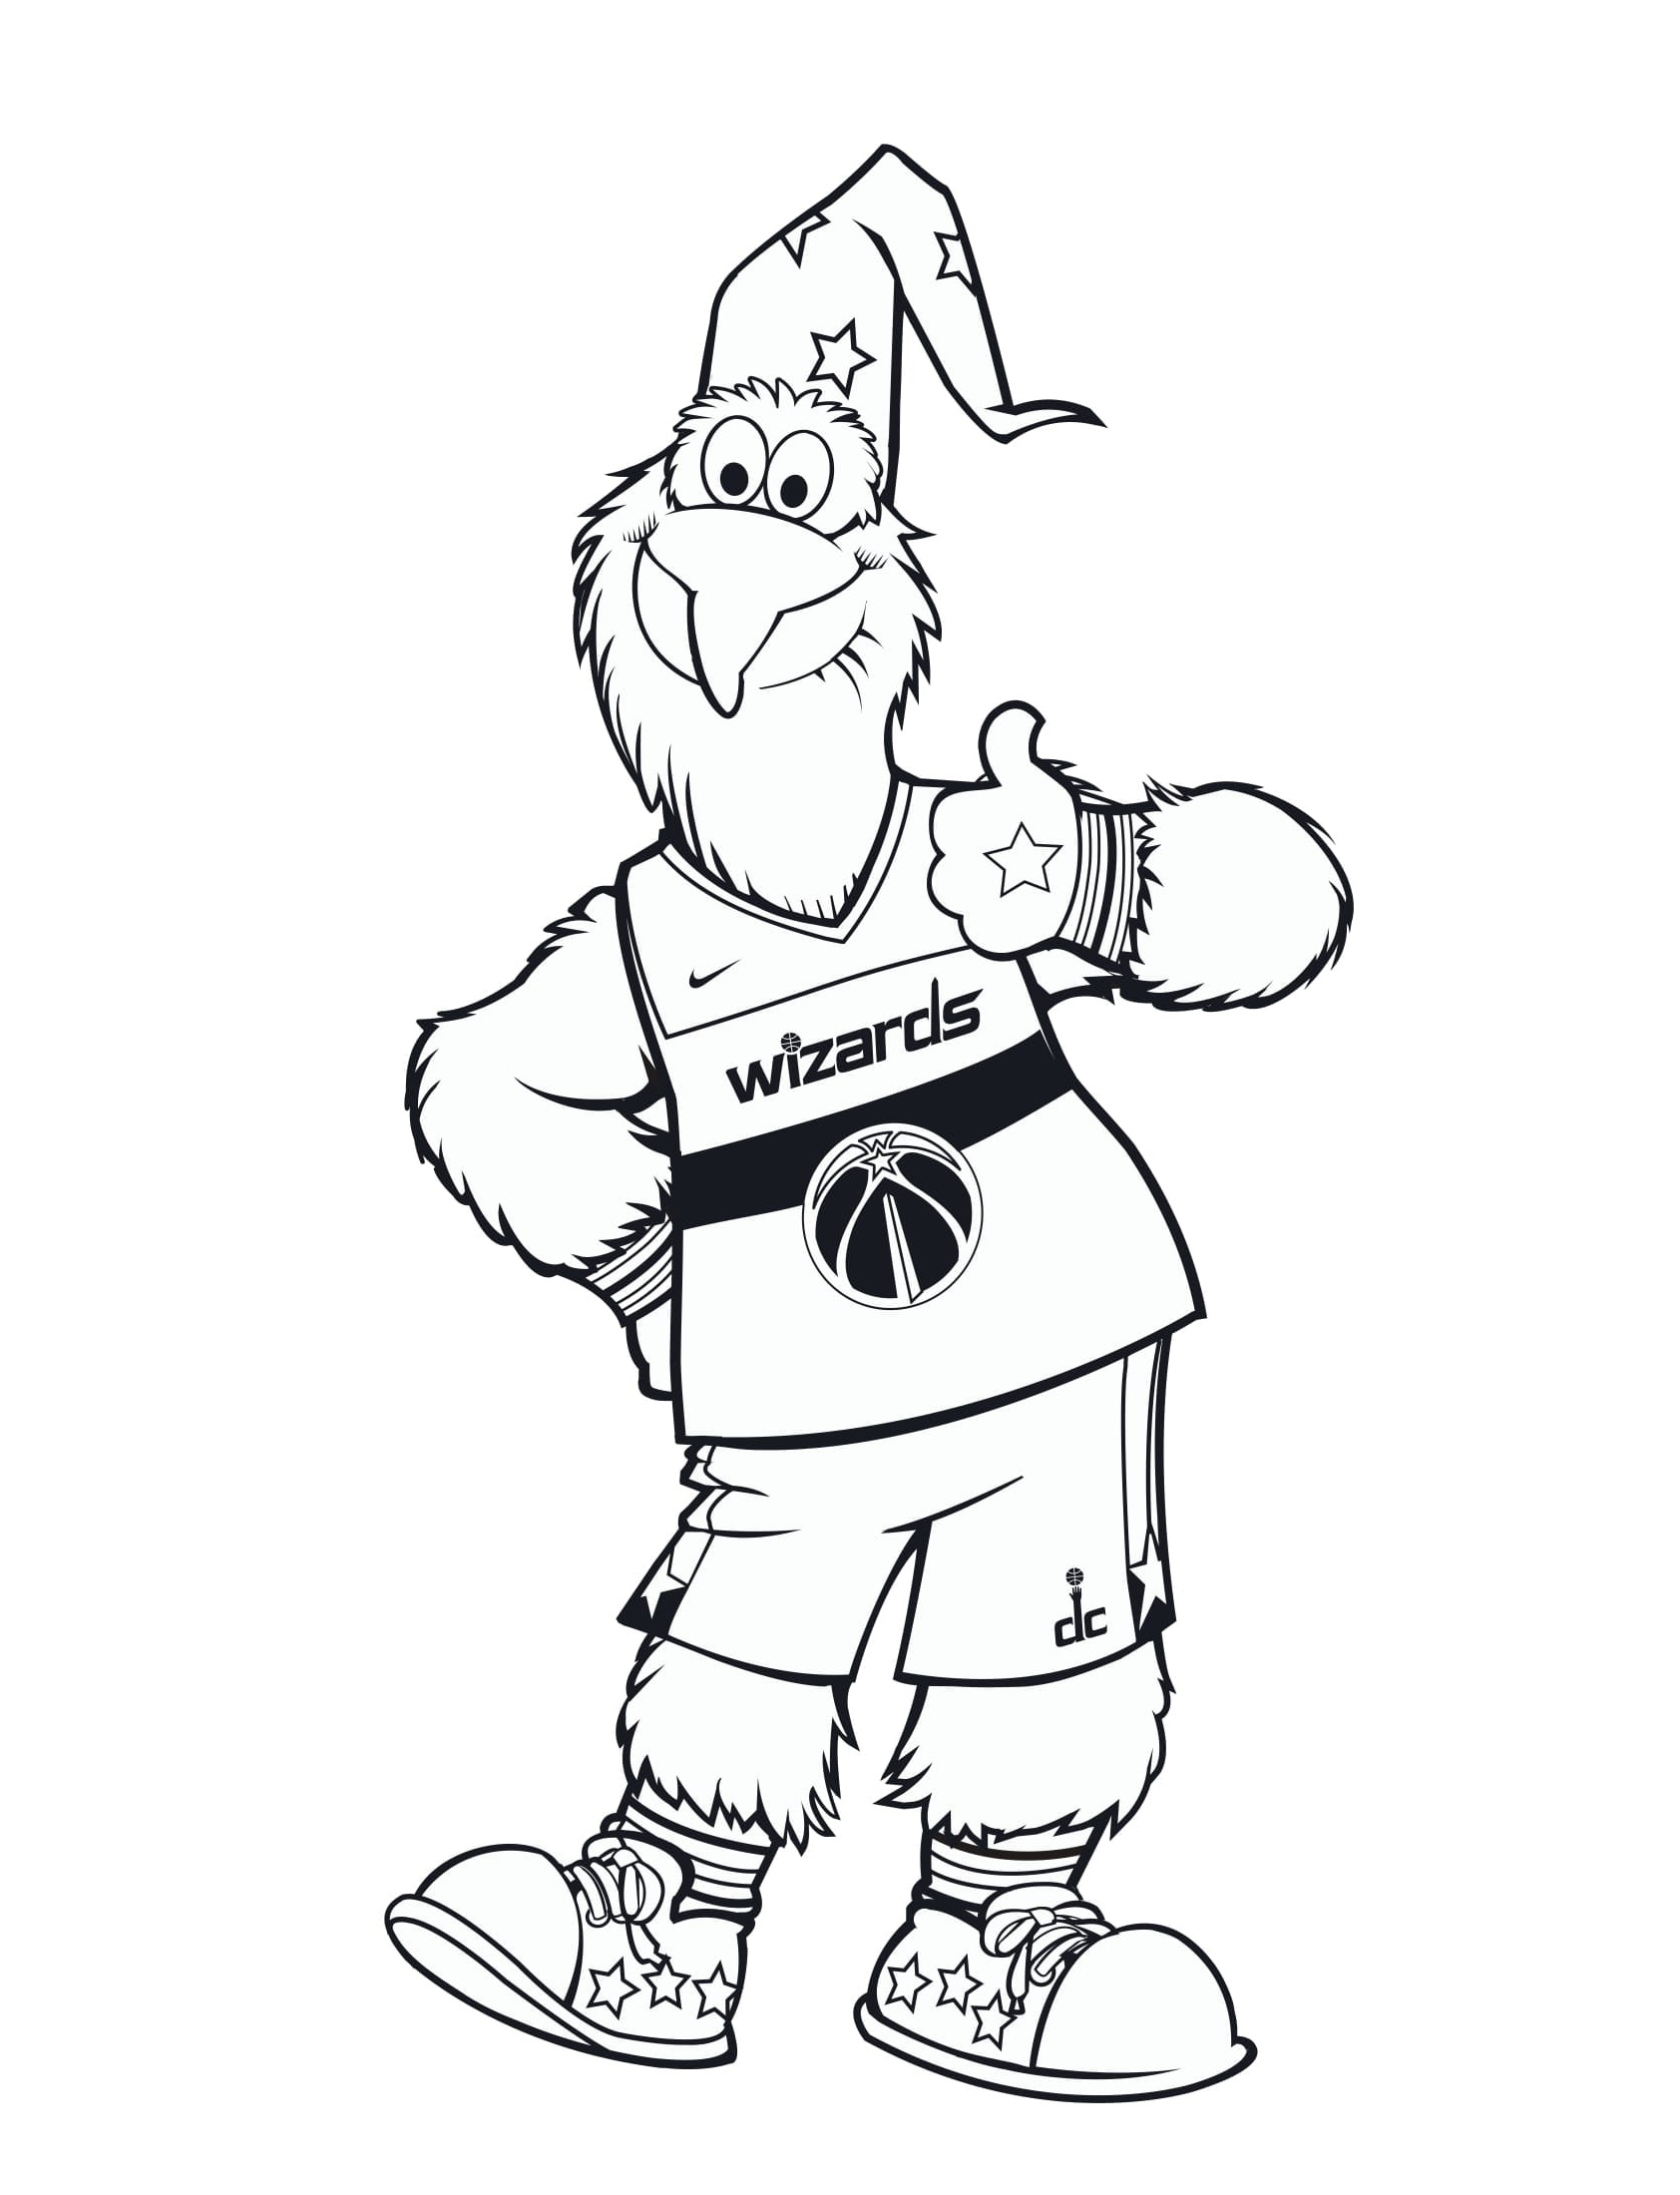 washington wizards mascot coloring pages